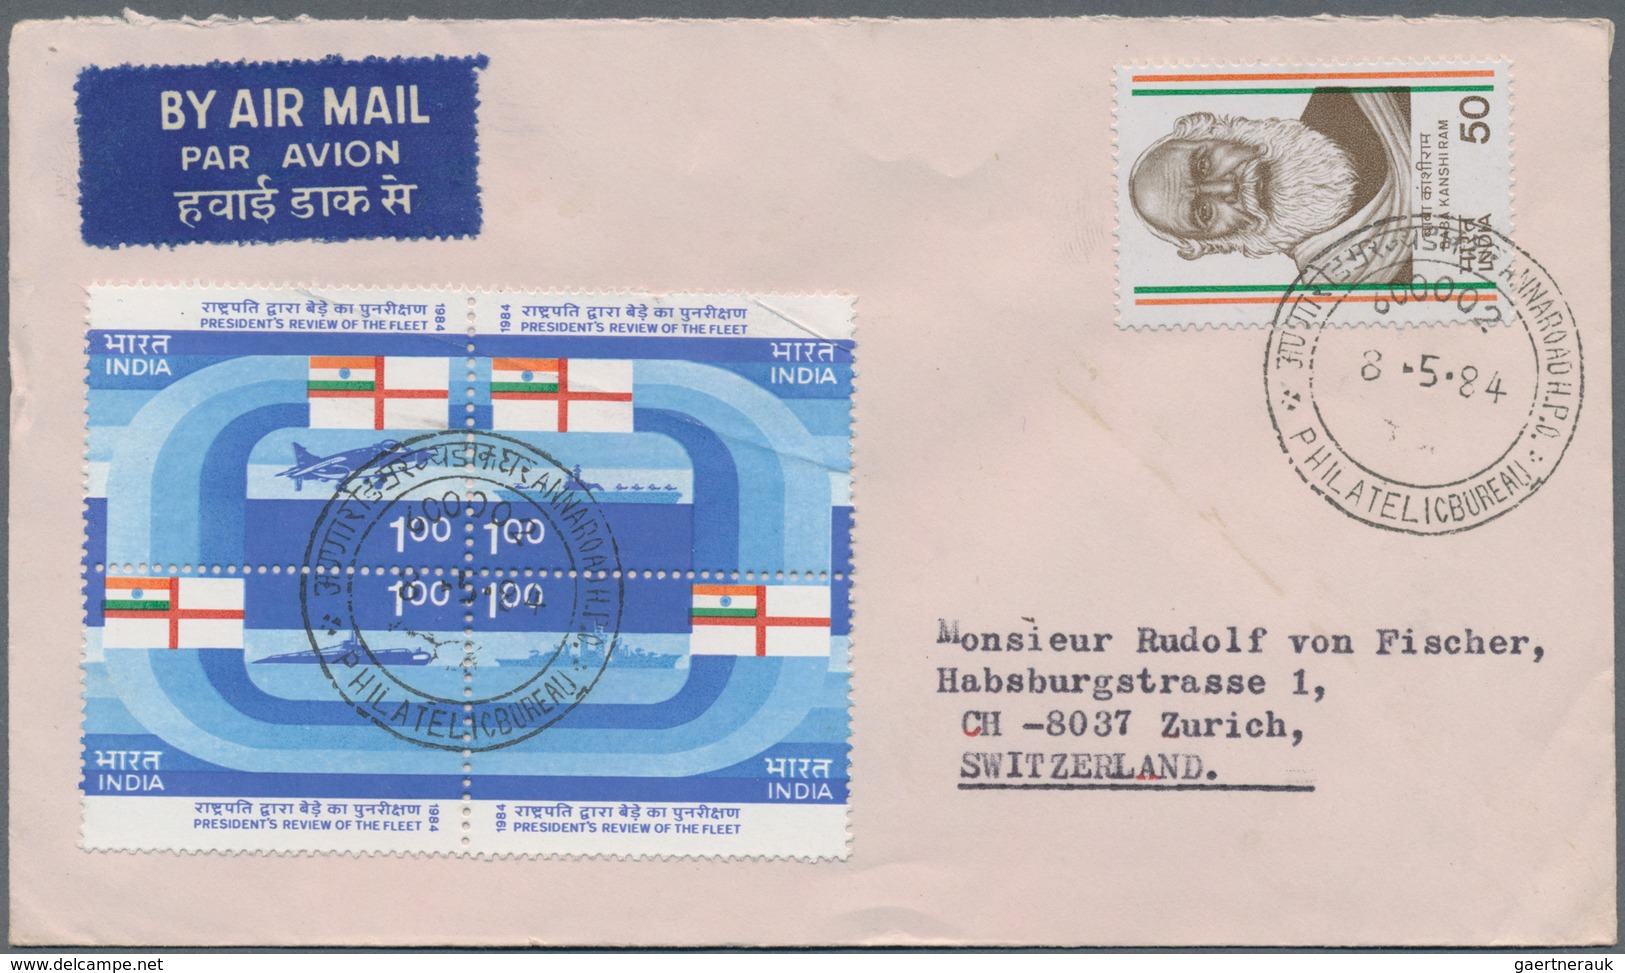 Indien: 1970's-1990's: About 120 Covers, Postcards And FDCs, Many Sent To Europe, With Some Good Fra - 1854 Britische Indien-Kompanie